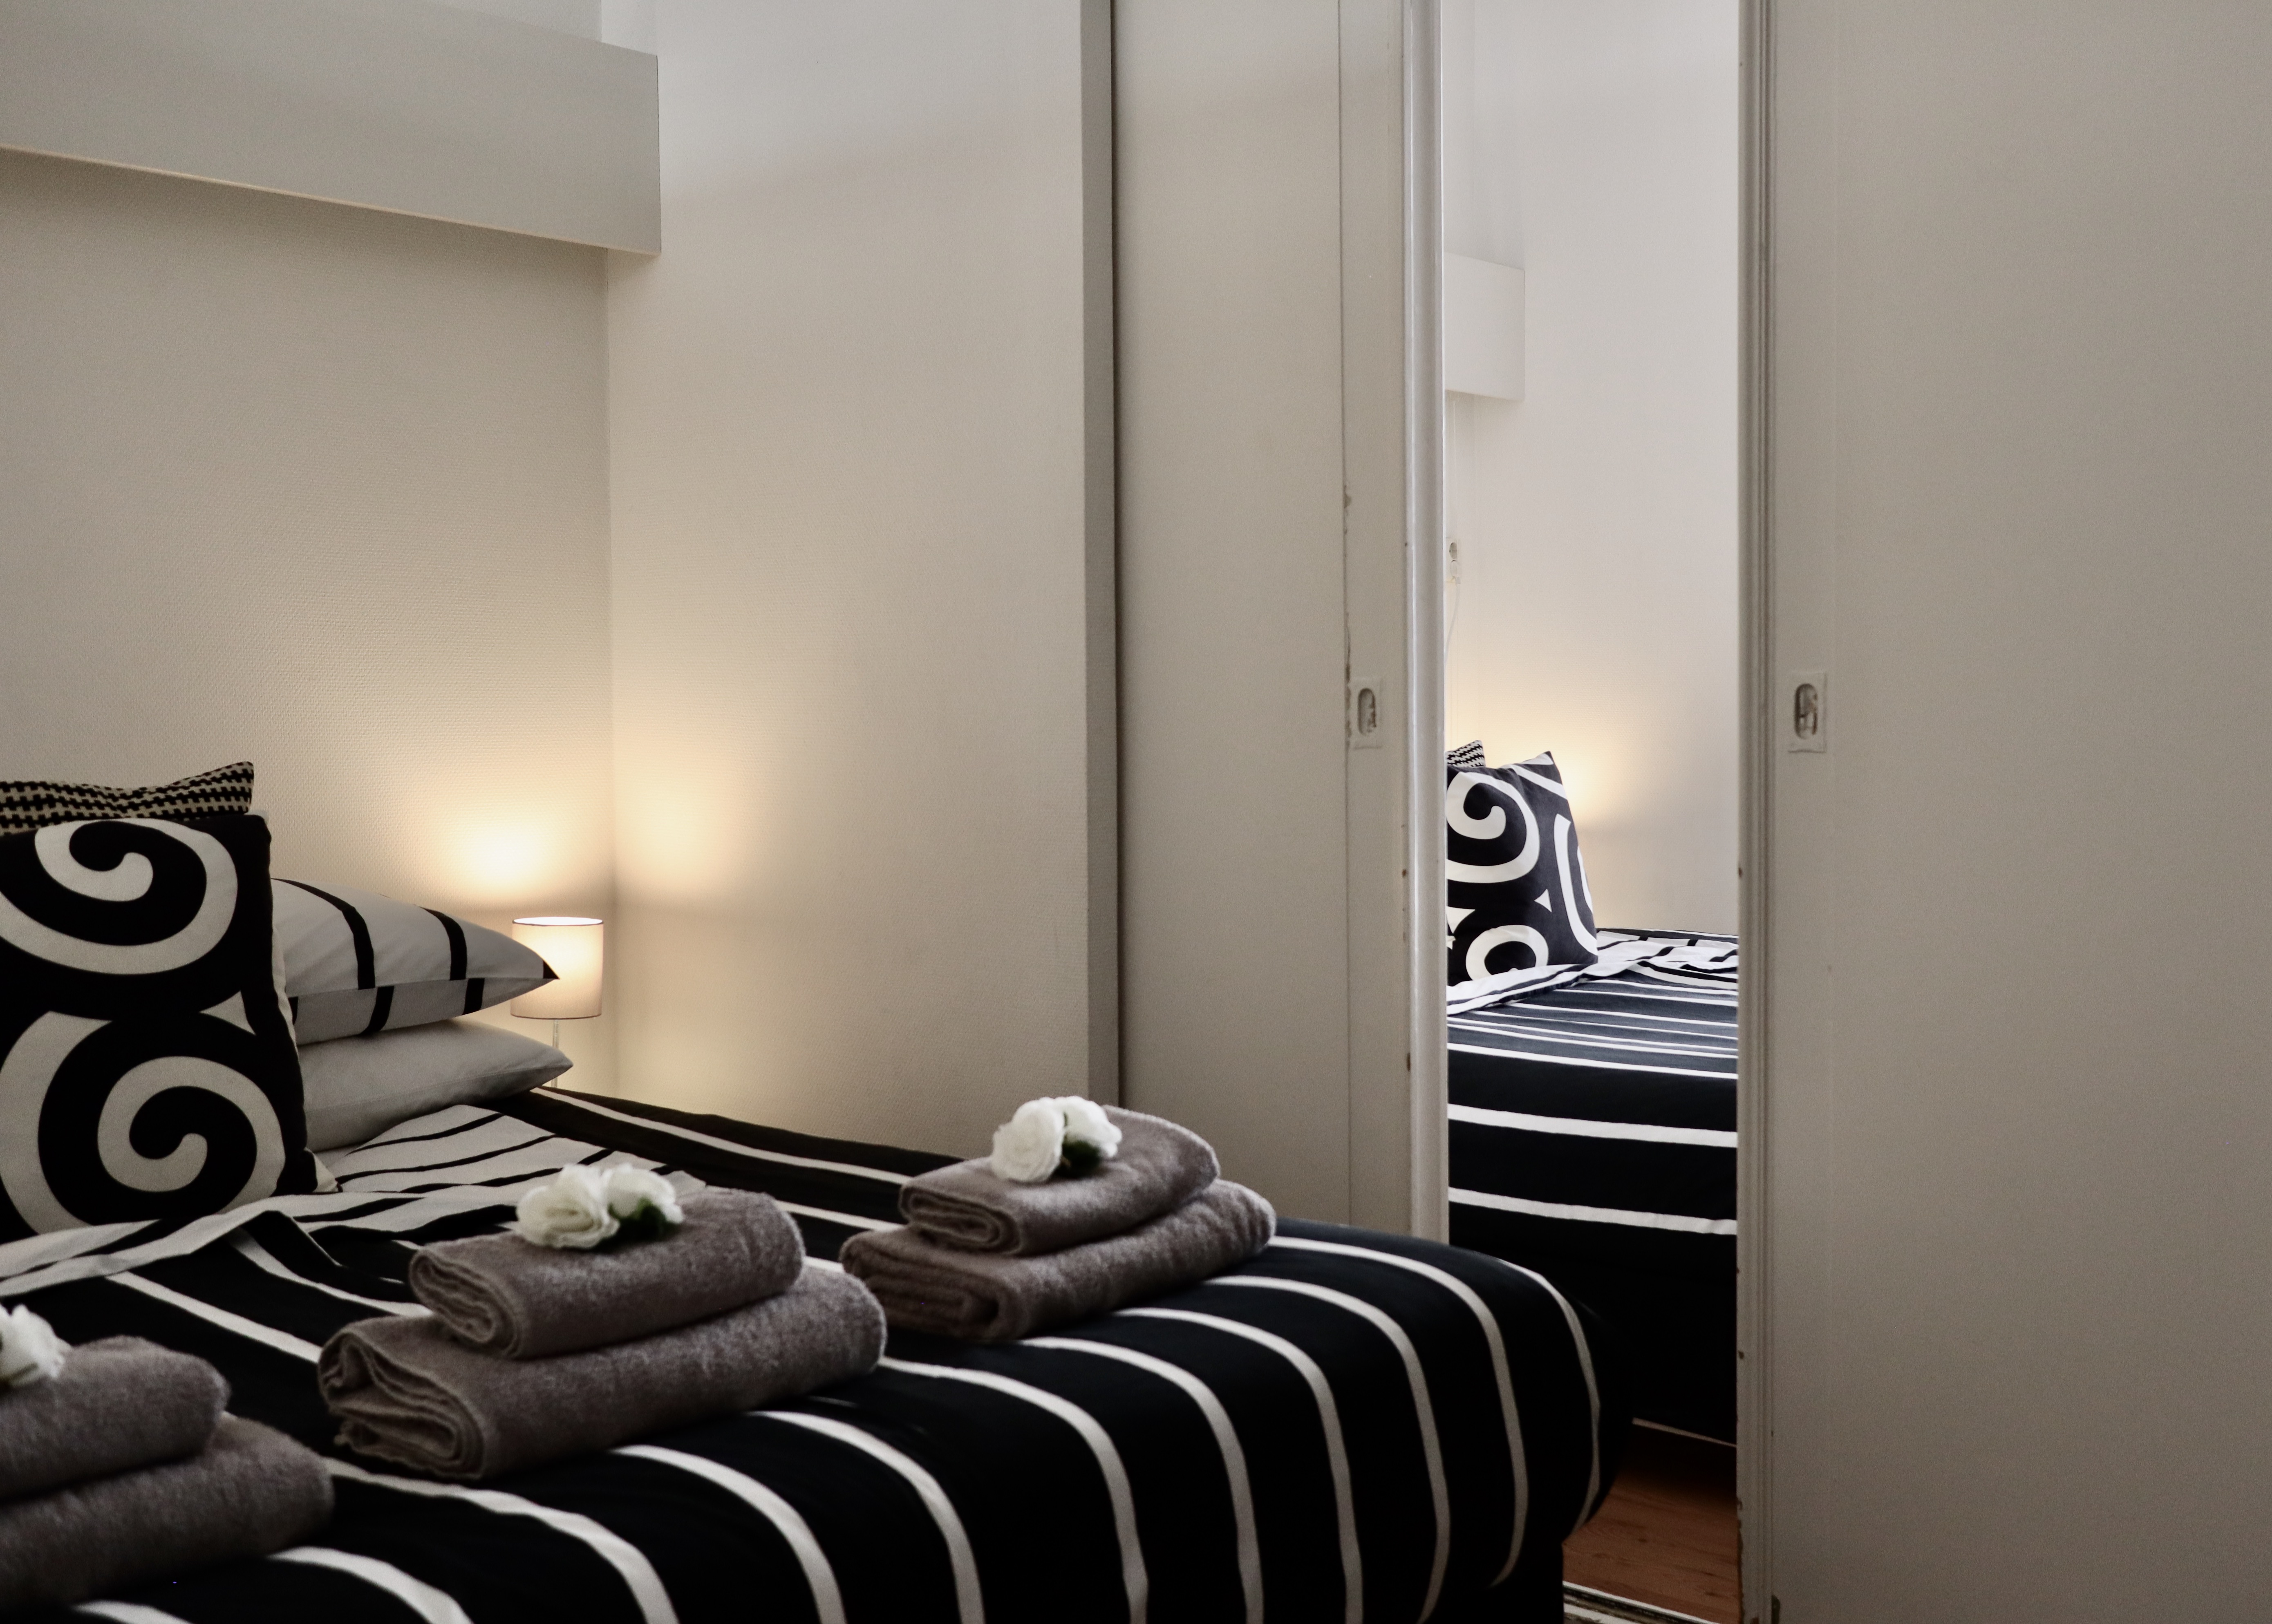 Book Two Bedroom Apartments Amsterdam